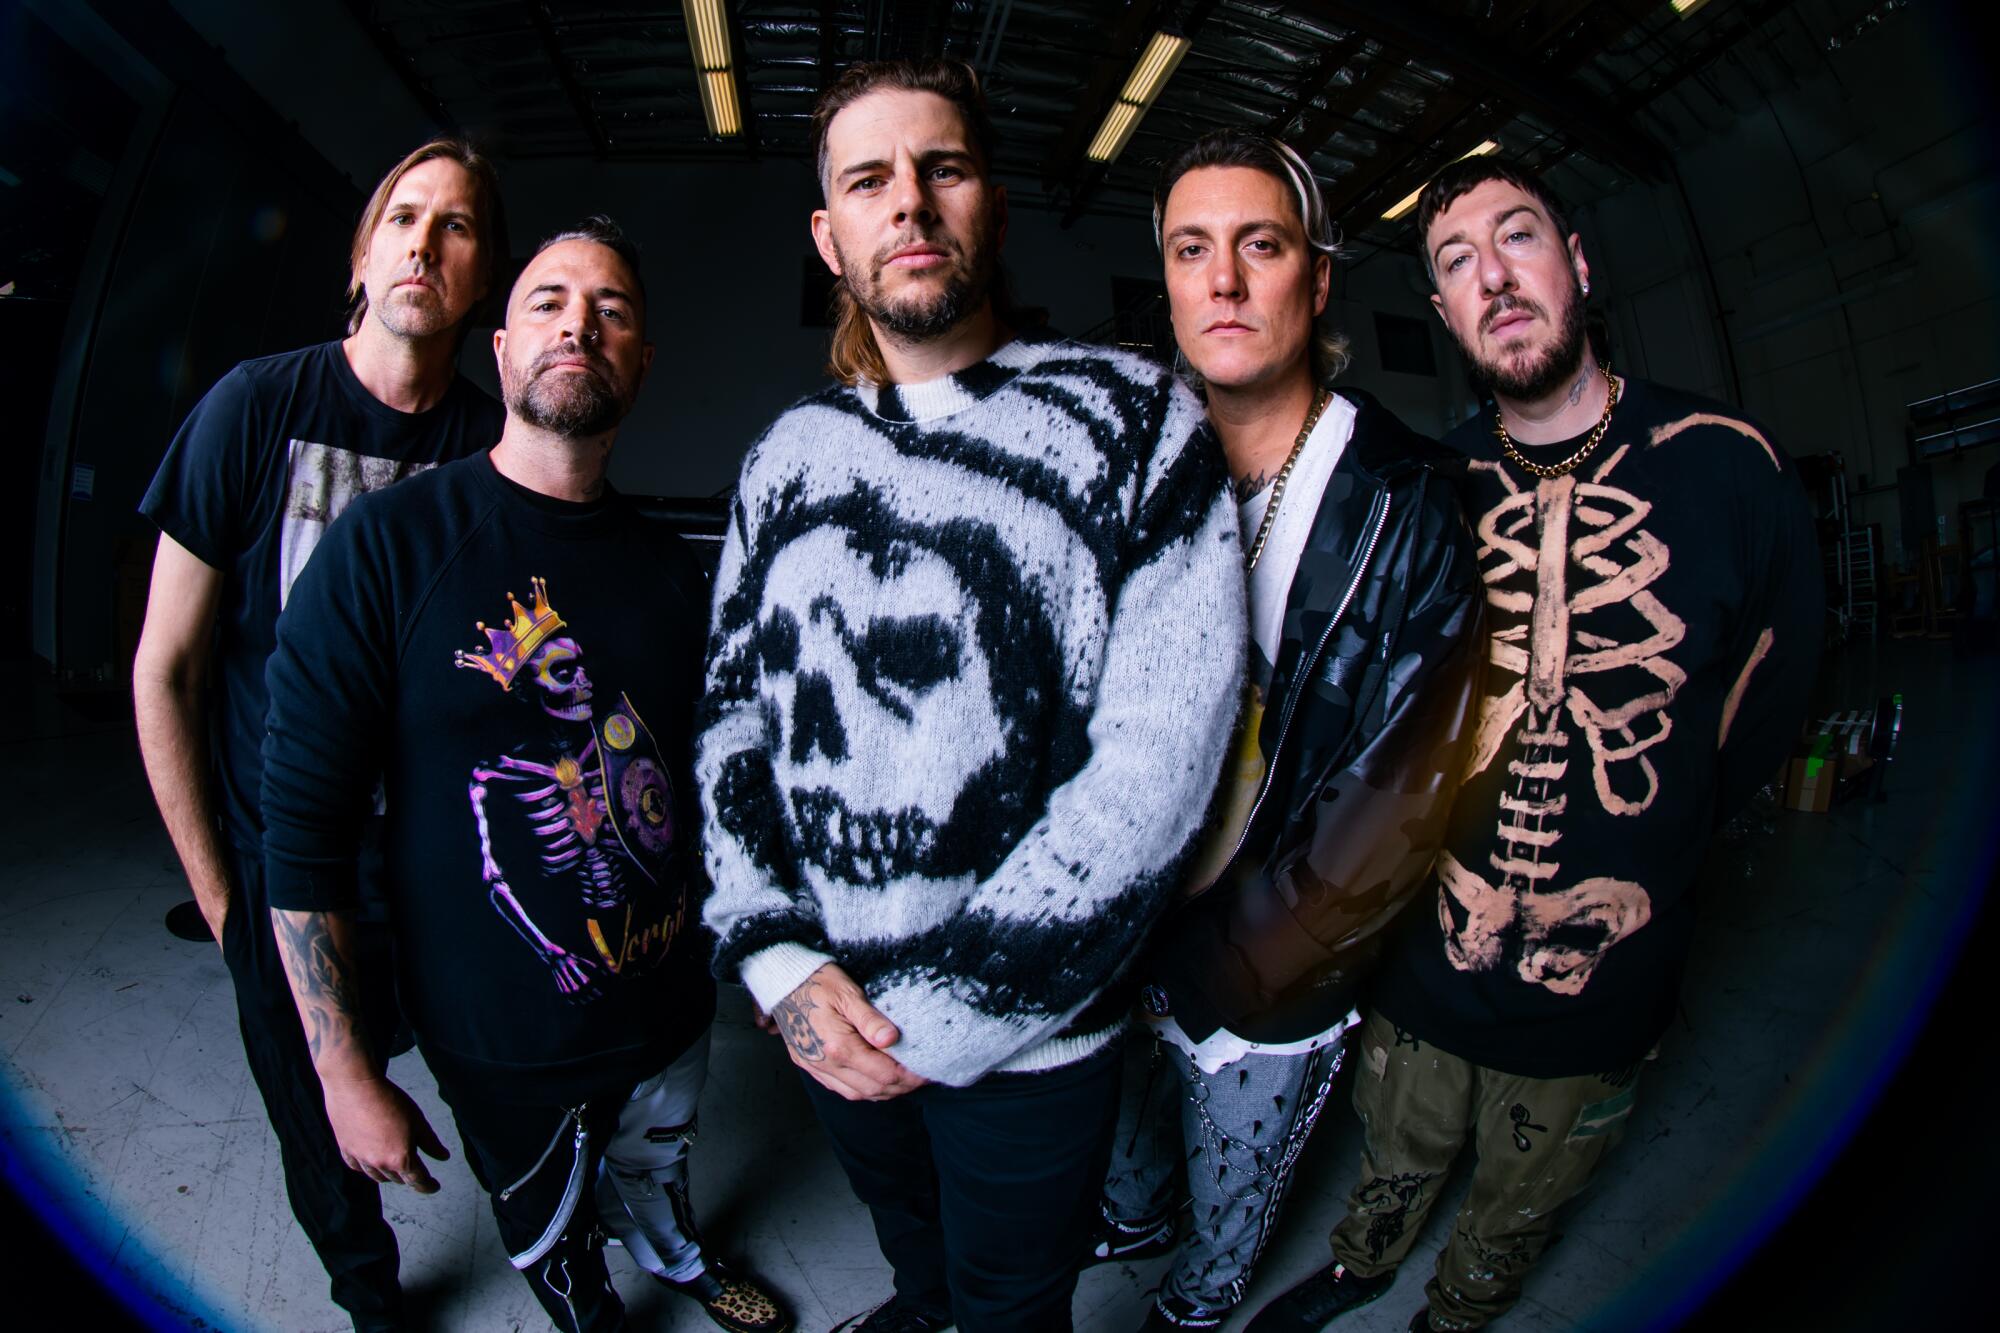 The five members of Avenged Sevenfold stare into the camera.